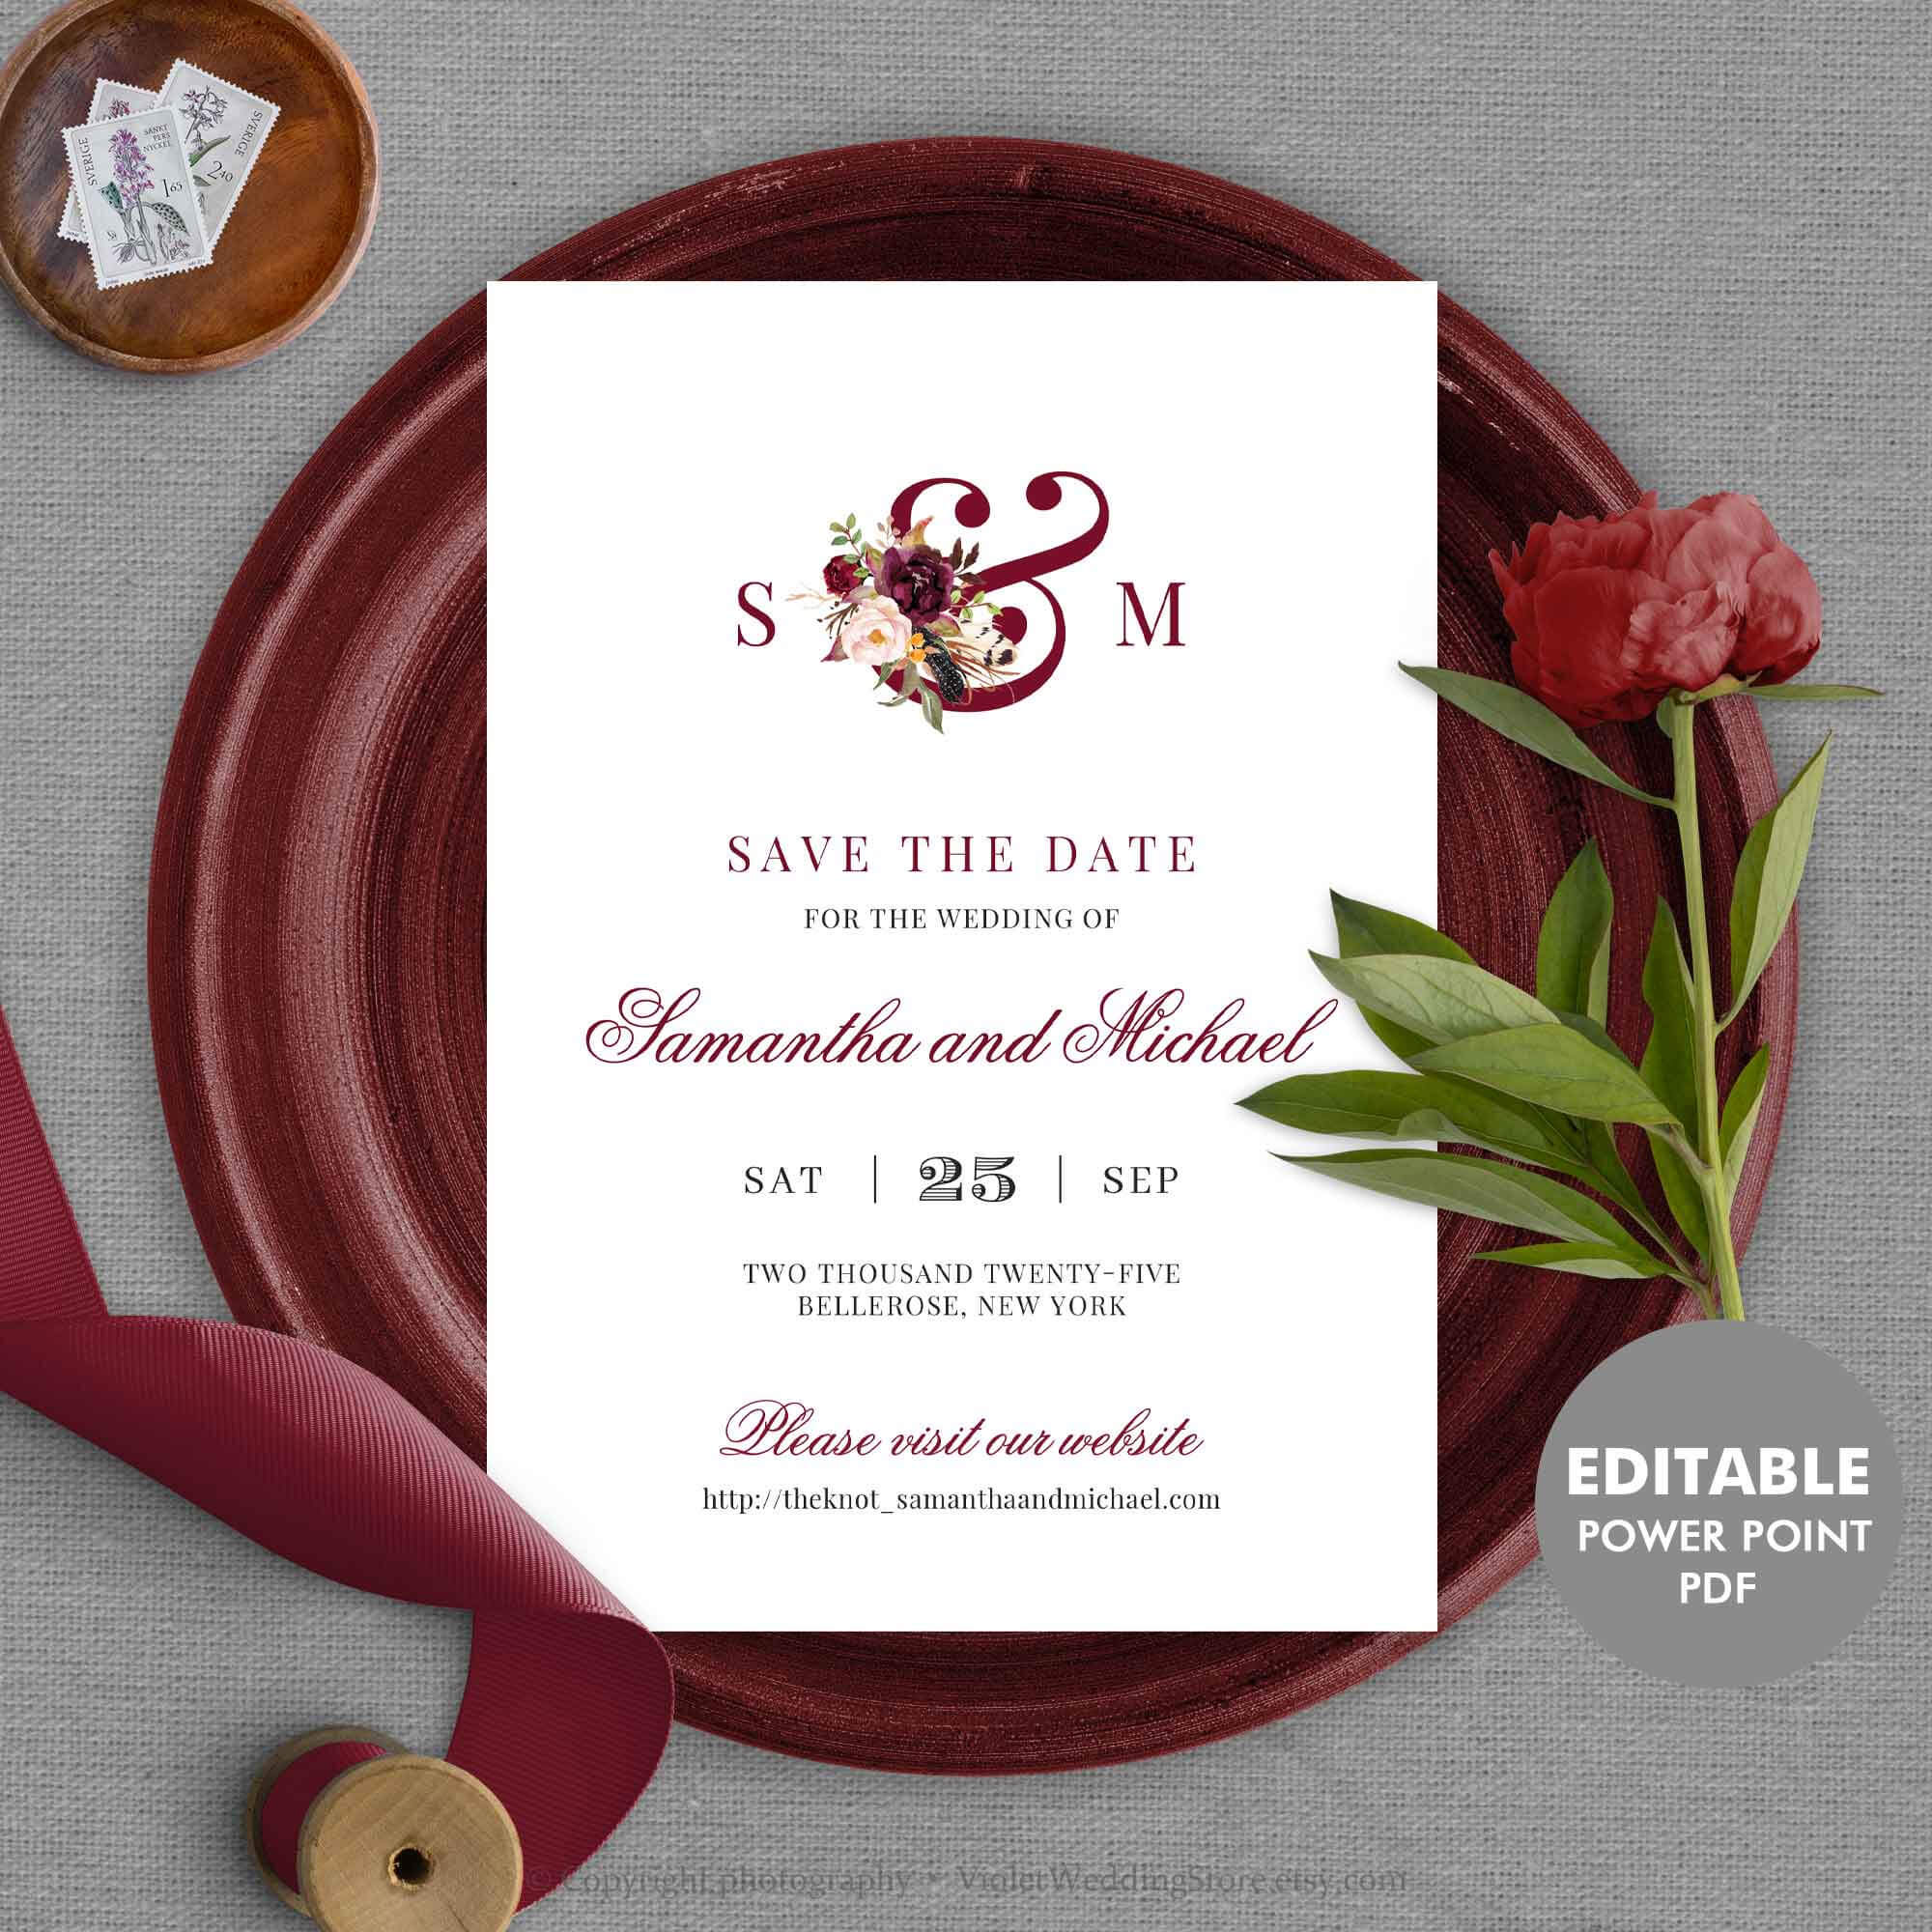 Burgundy Save The Date Card Template, Editable Monogram Save The Date,  Printable Wedding Save The Date Instant Download Mar1 For Save The Date Powerpoint Template